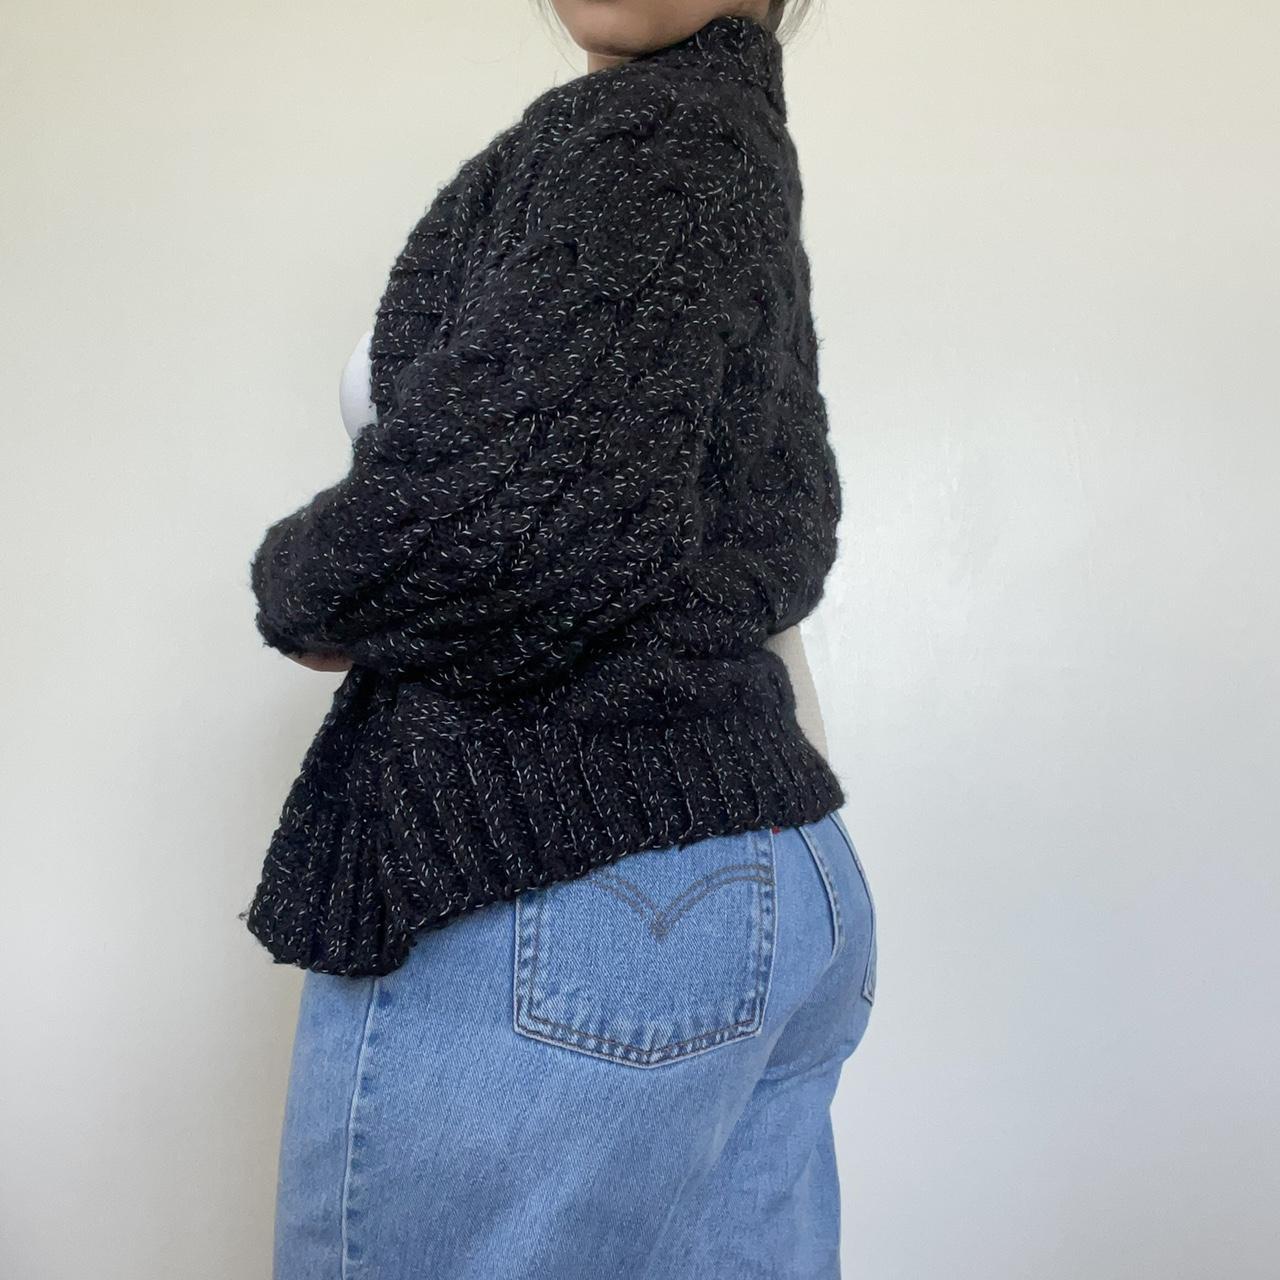 Product Image 2 - Black Cable Knit Cardigan🌻

❀ labeled